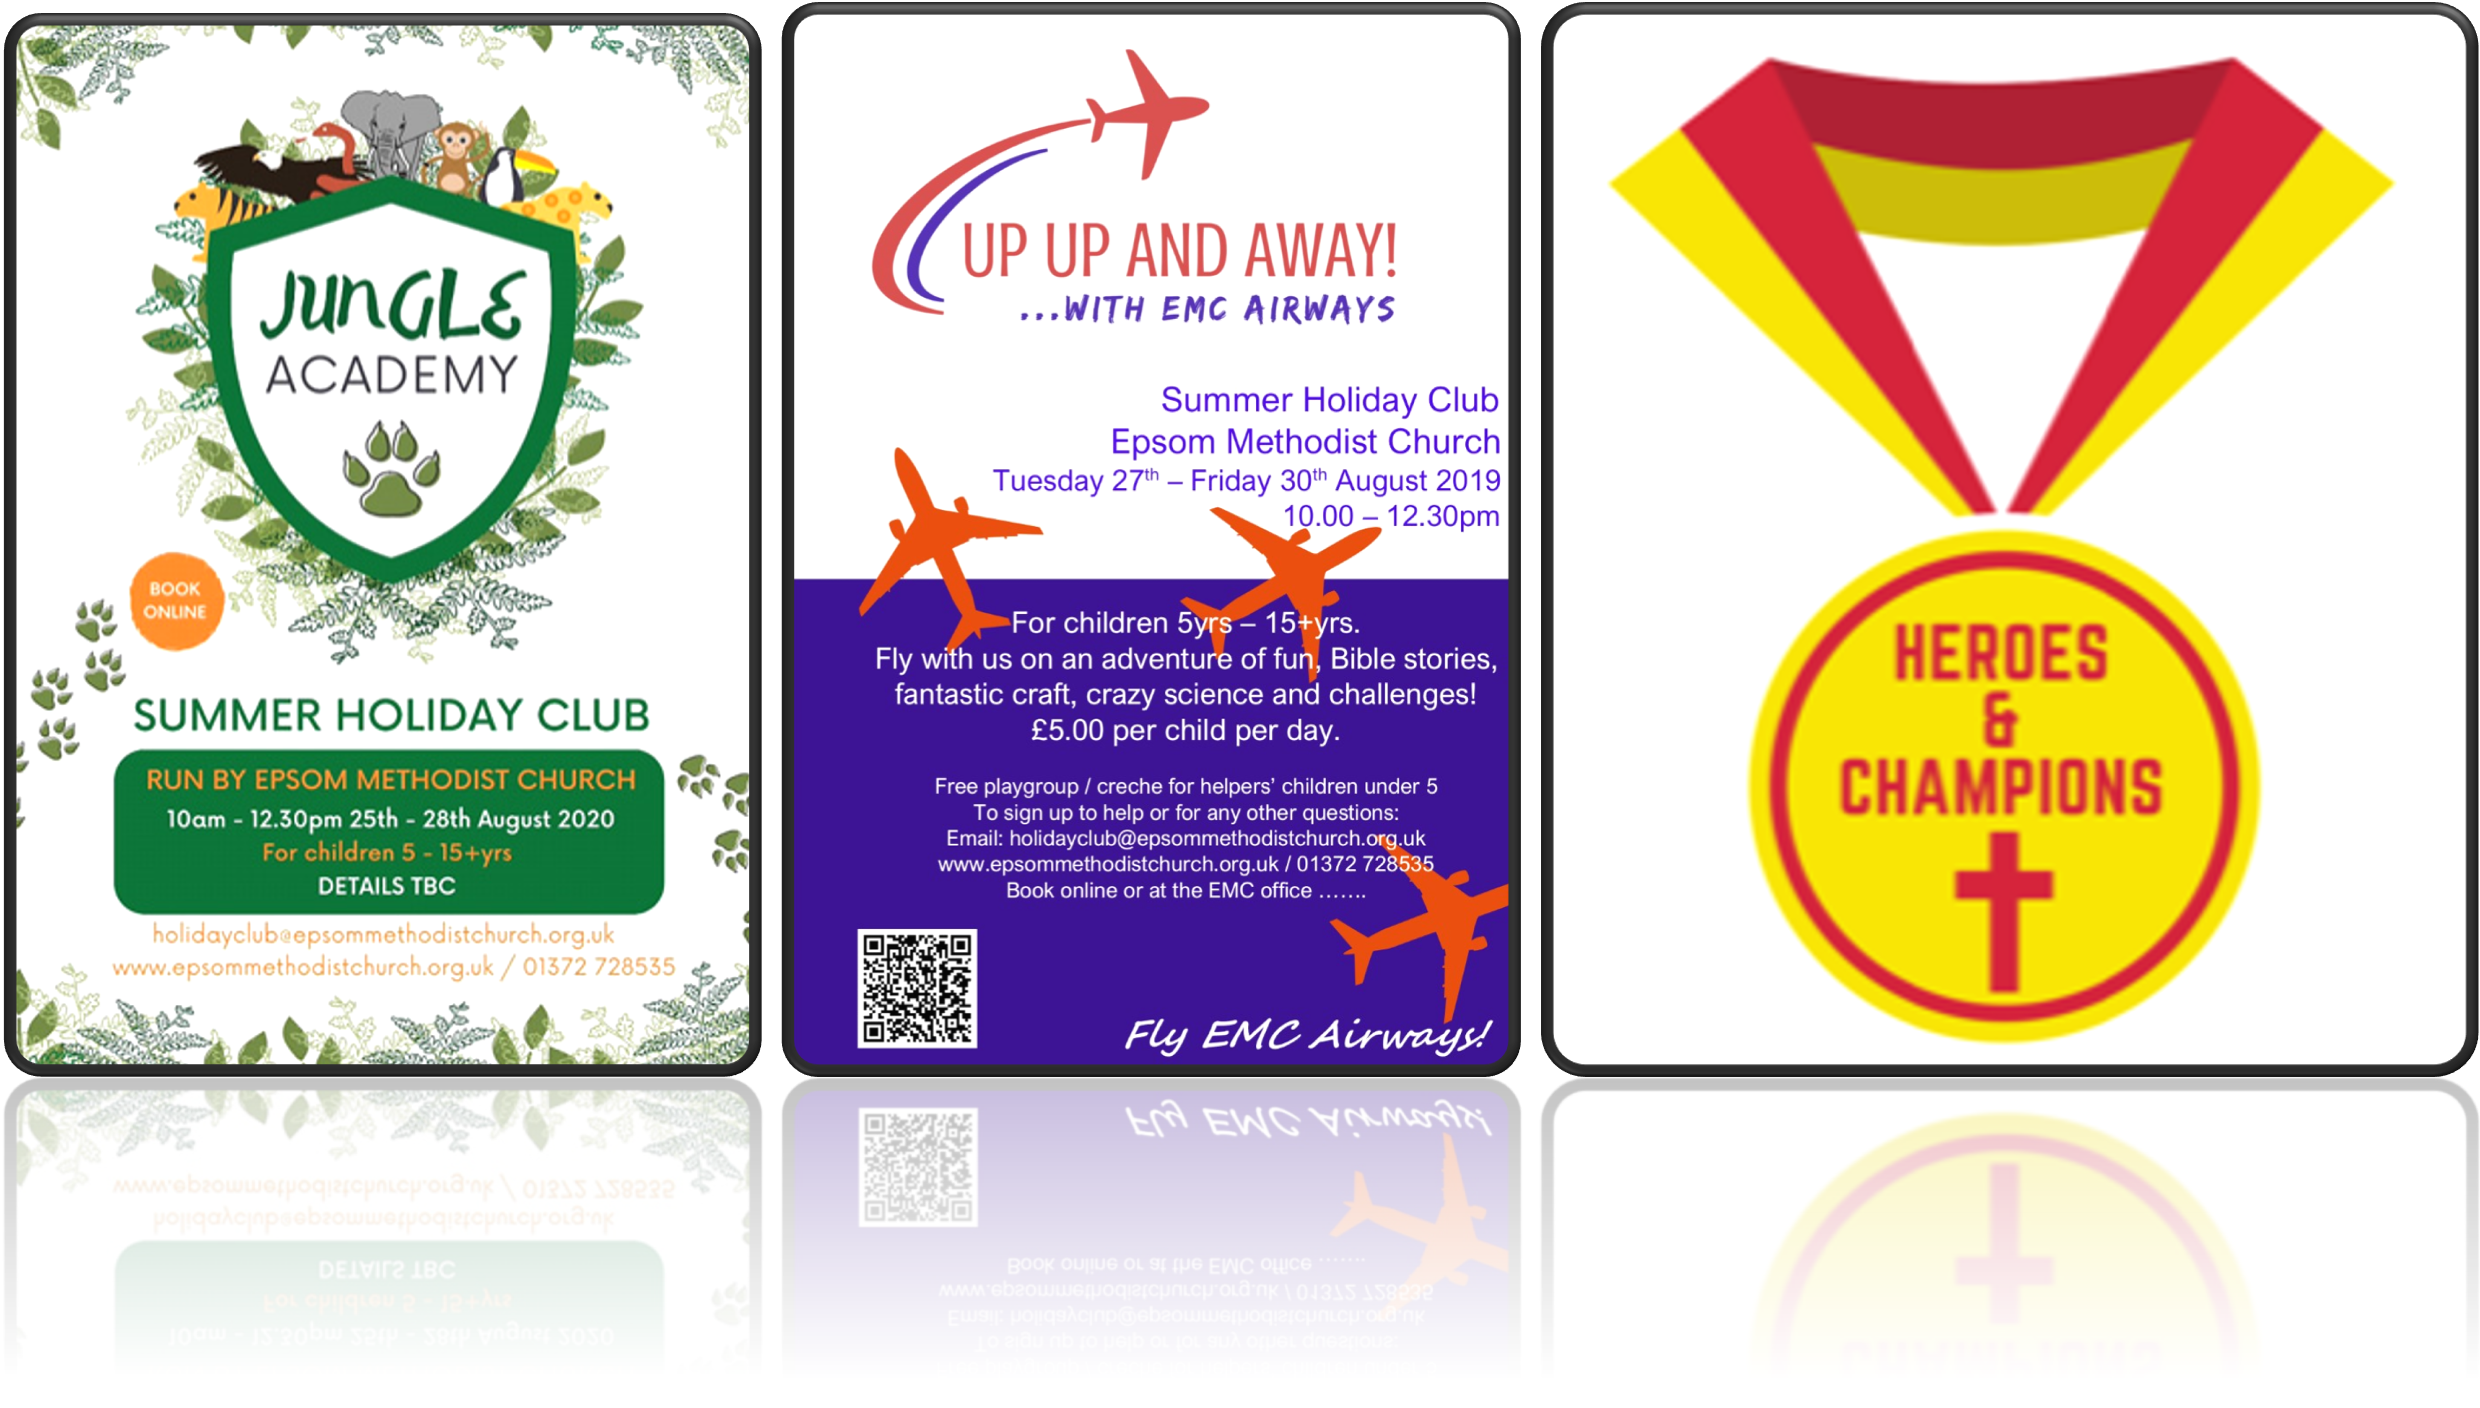 Holiday Clubs